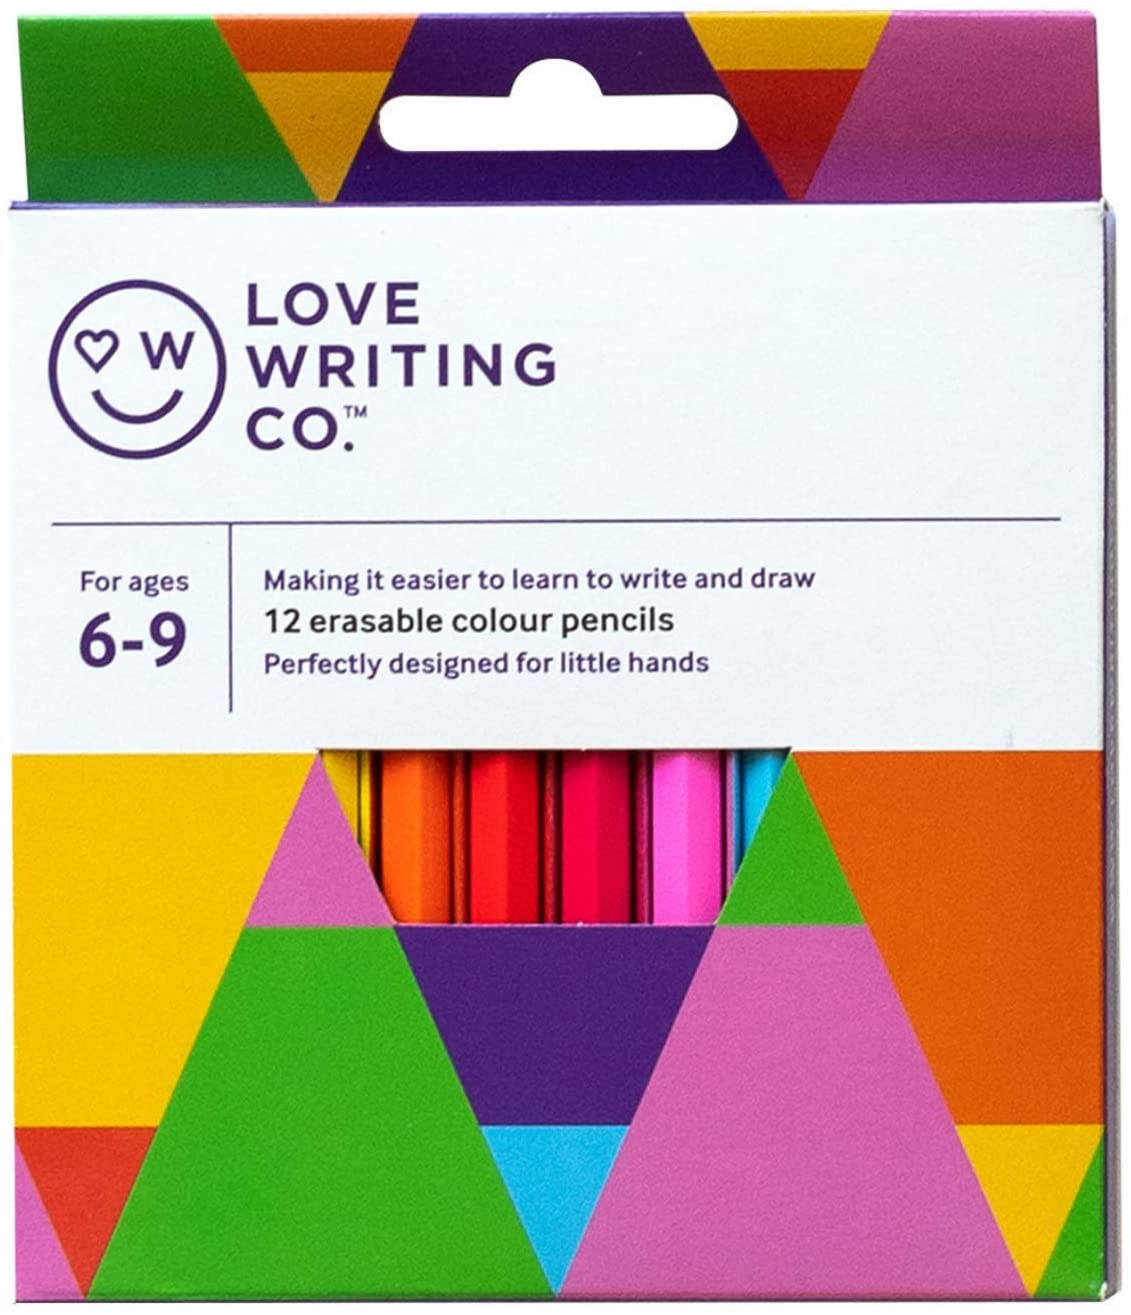 Love Writing Co. Erasable Colouring Pencils - Ages 6 to 9 (Pack of 12)